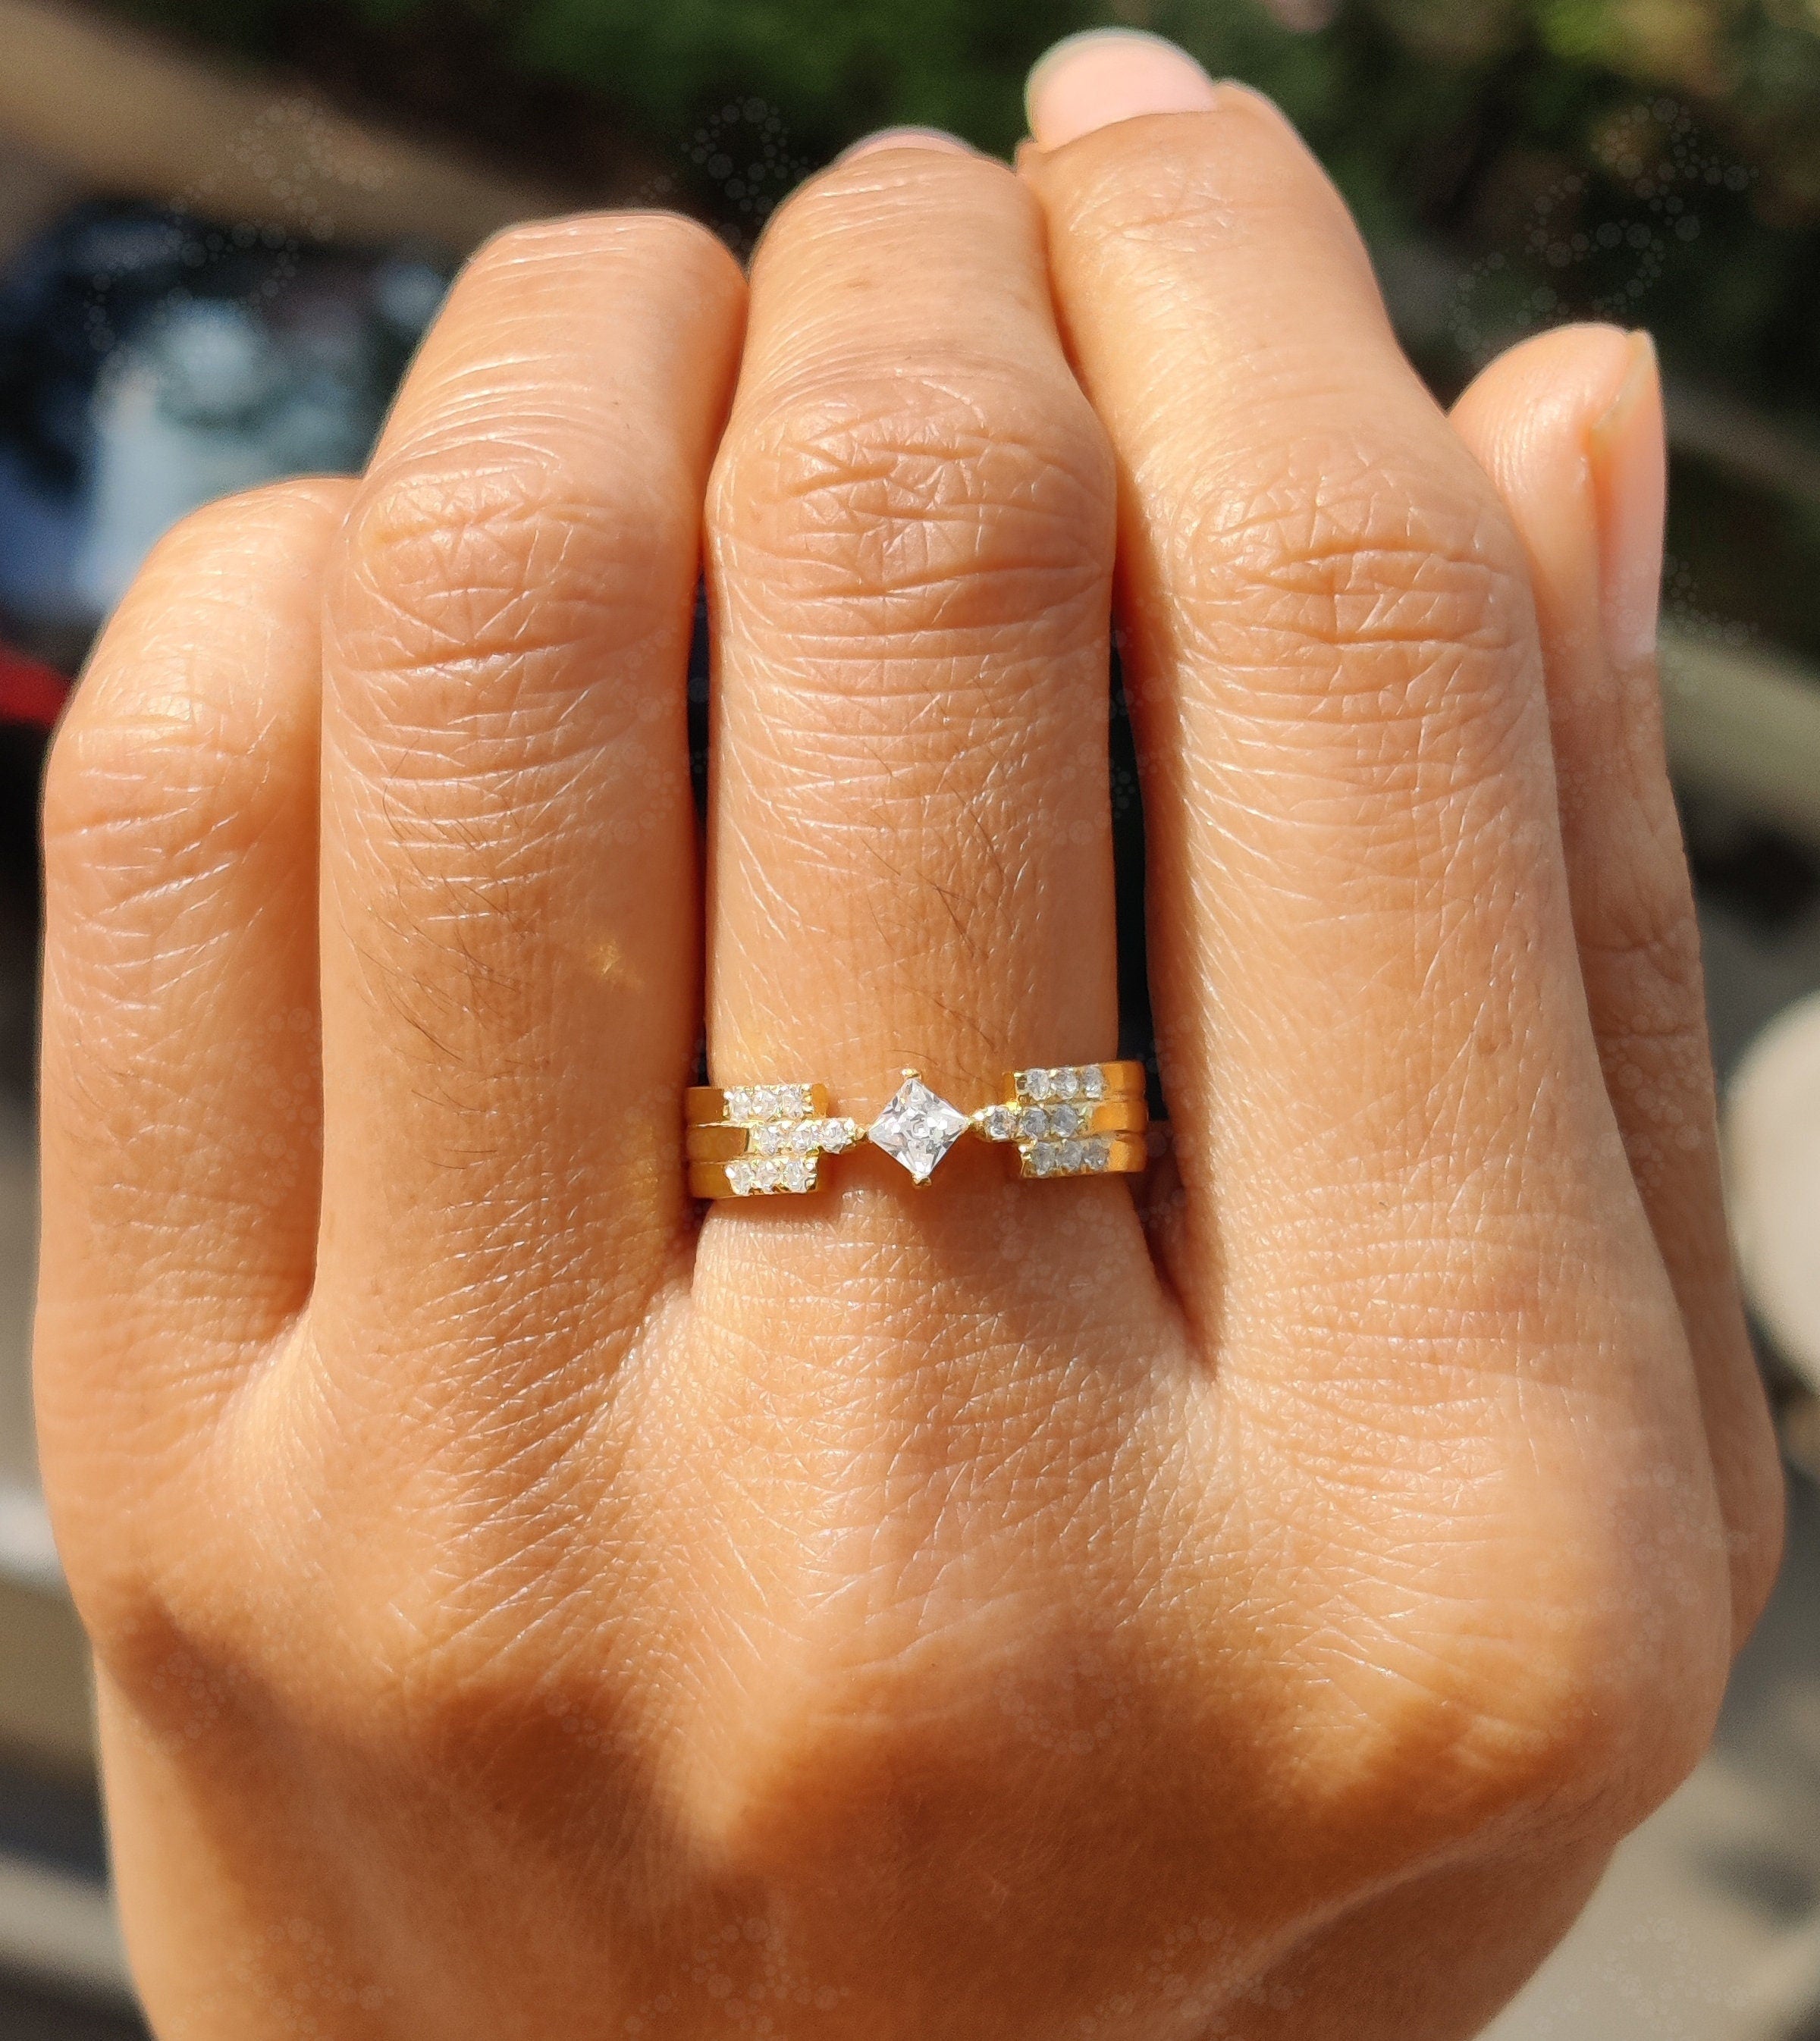 Princess Stacking Ring: A Sparkling Moissanite Anniversary Ring in Silver and Gold, Perfect as a 3-Row Moissanite Wedding Band for Women